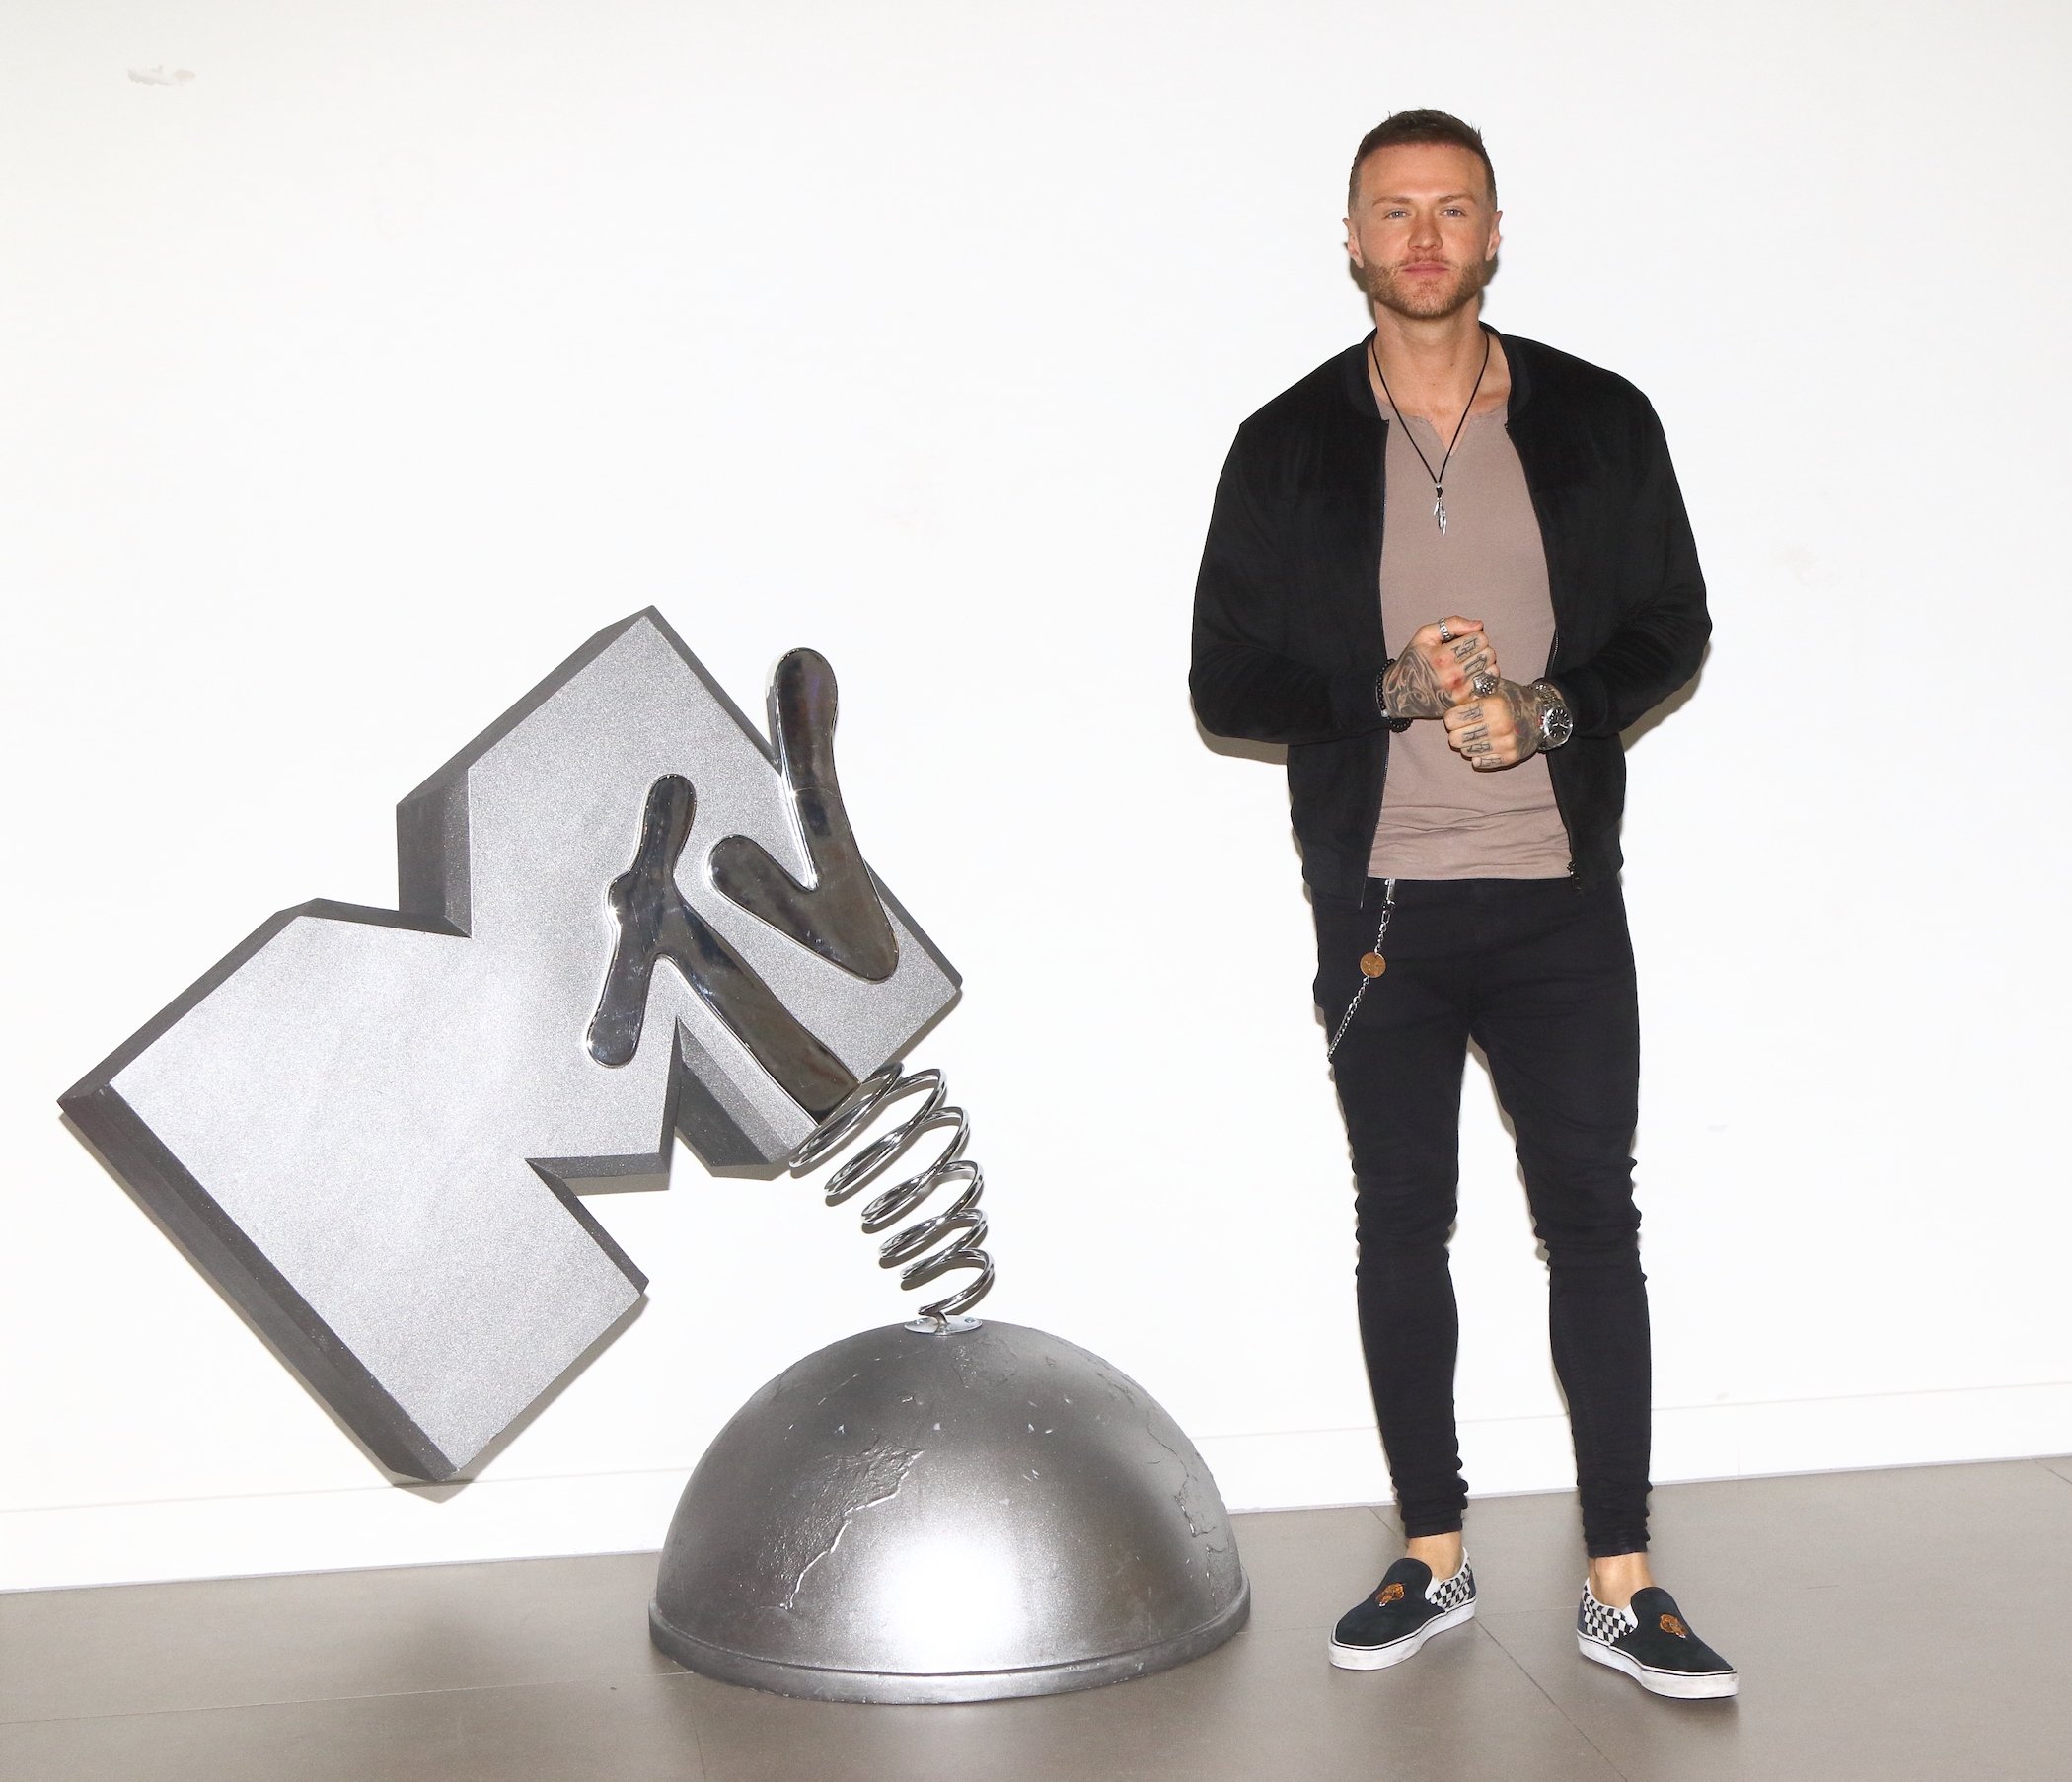 Kyle Christie from MTV’s 'The Challenge' Season 37 standing next to a large MTV statue. 'The Challenge' Season 37 elimination spoilers note Kyle wins his elimination round in episode 11